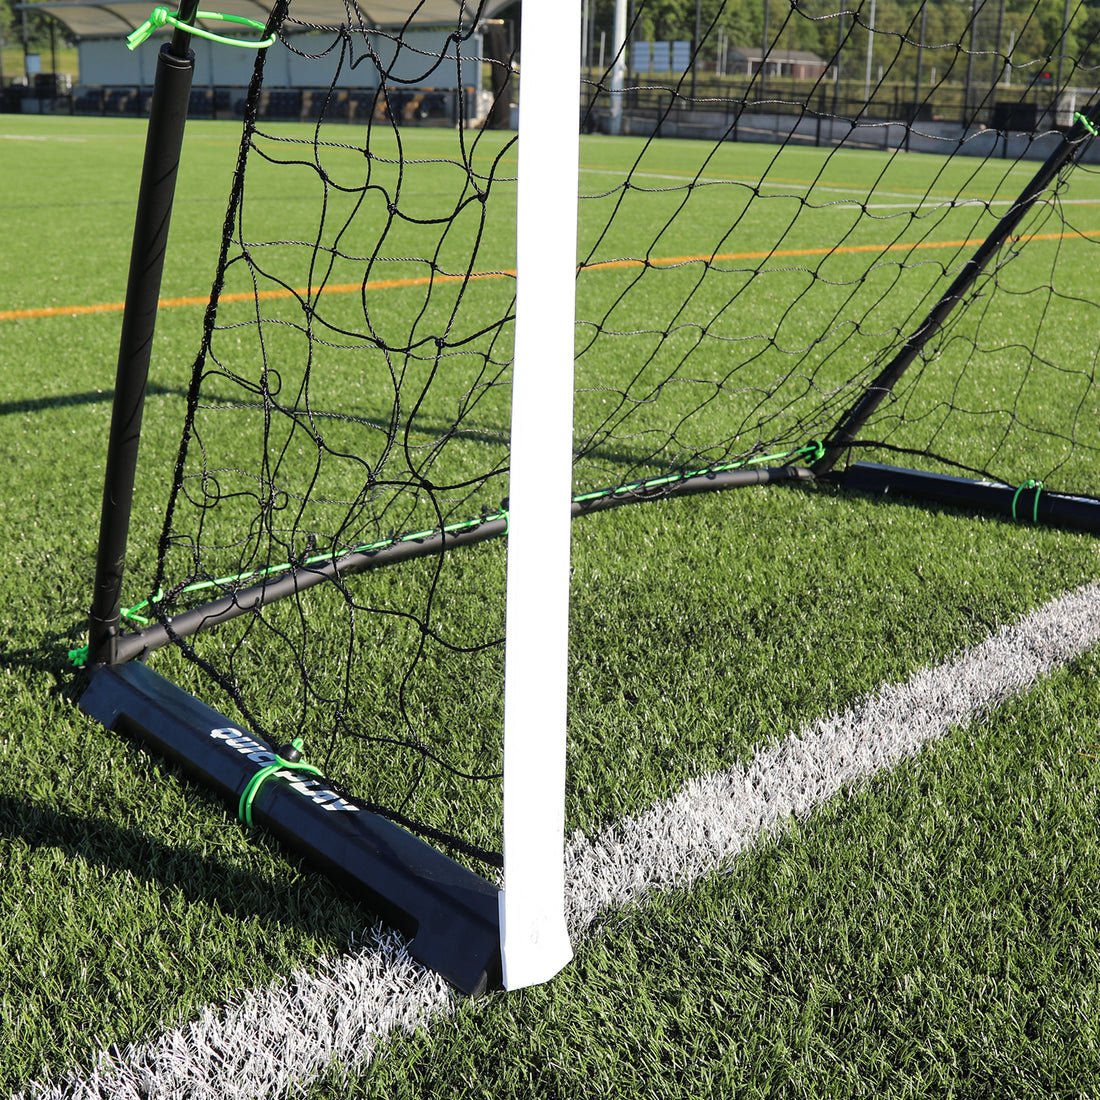 KICKSTER Base Weight (Set of 2) Small Goal Sizes: 1.5x1m > 8x5' - For NEW KICKSTERS only